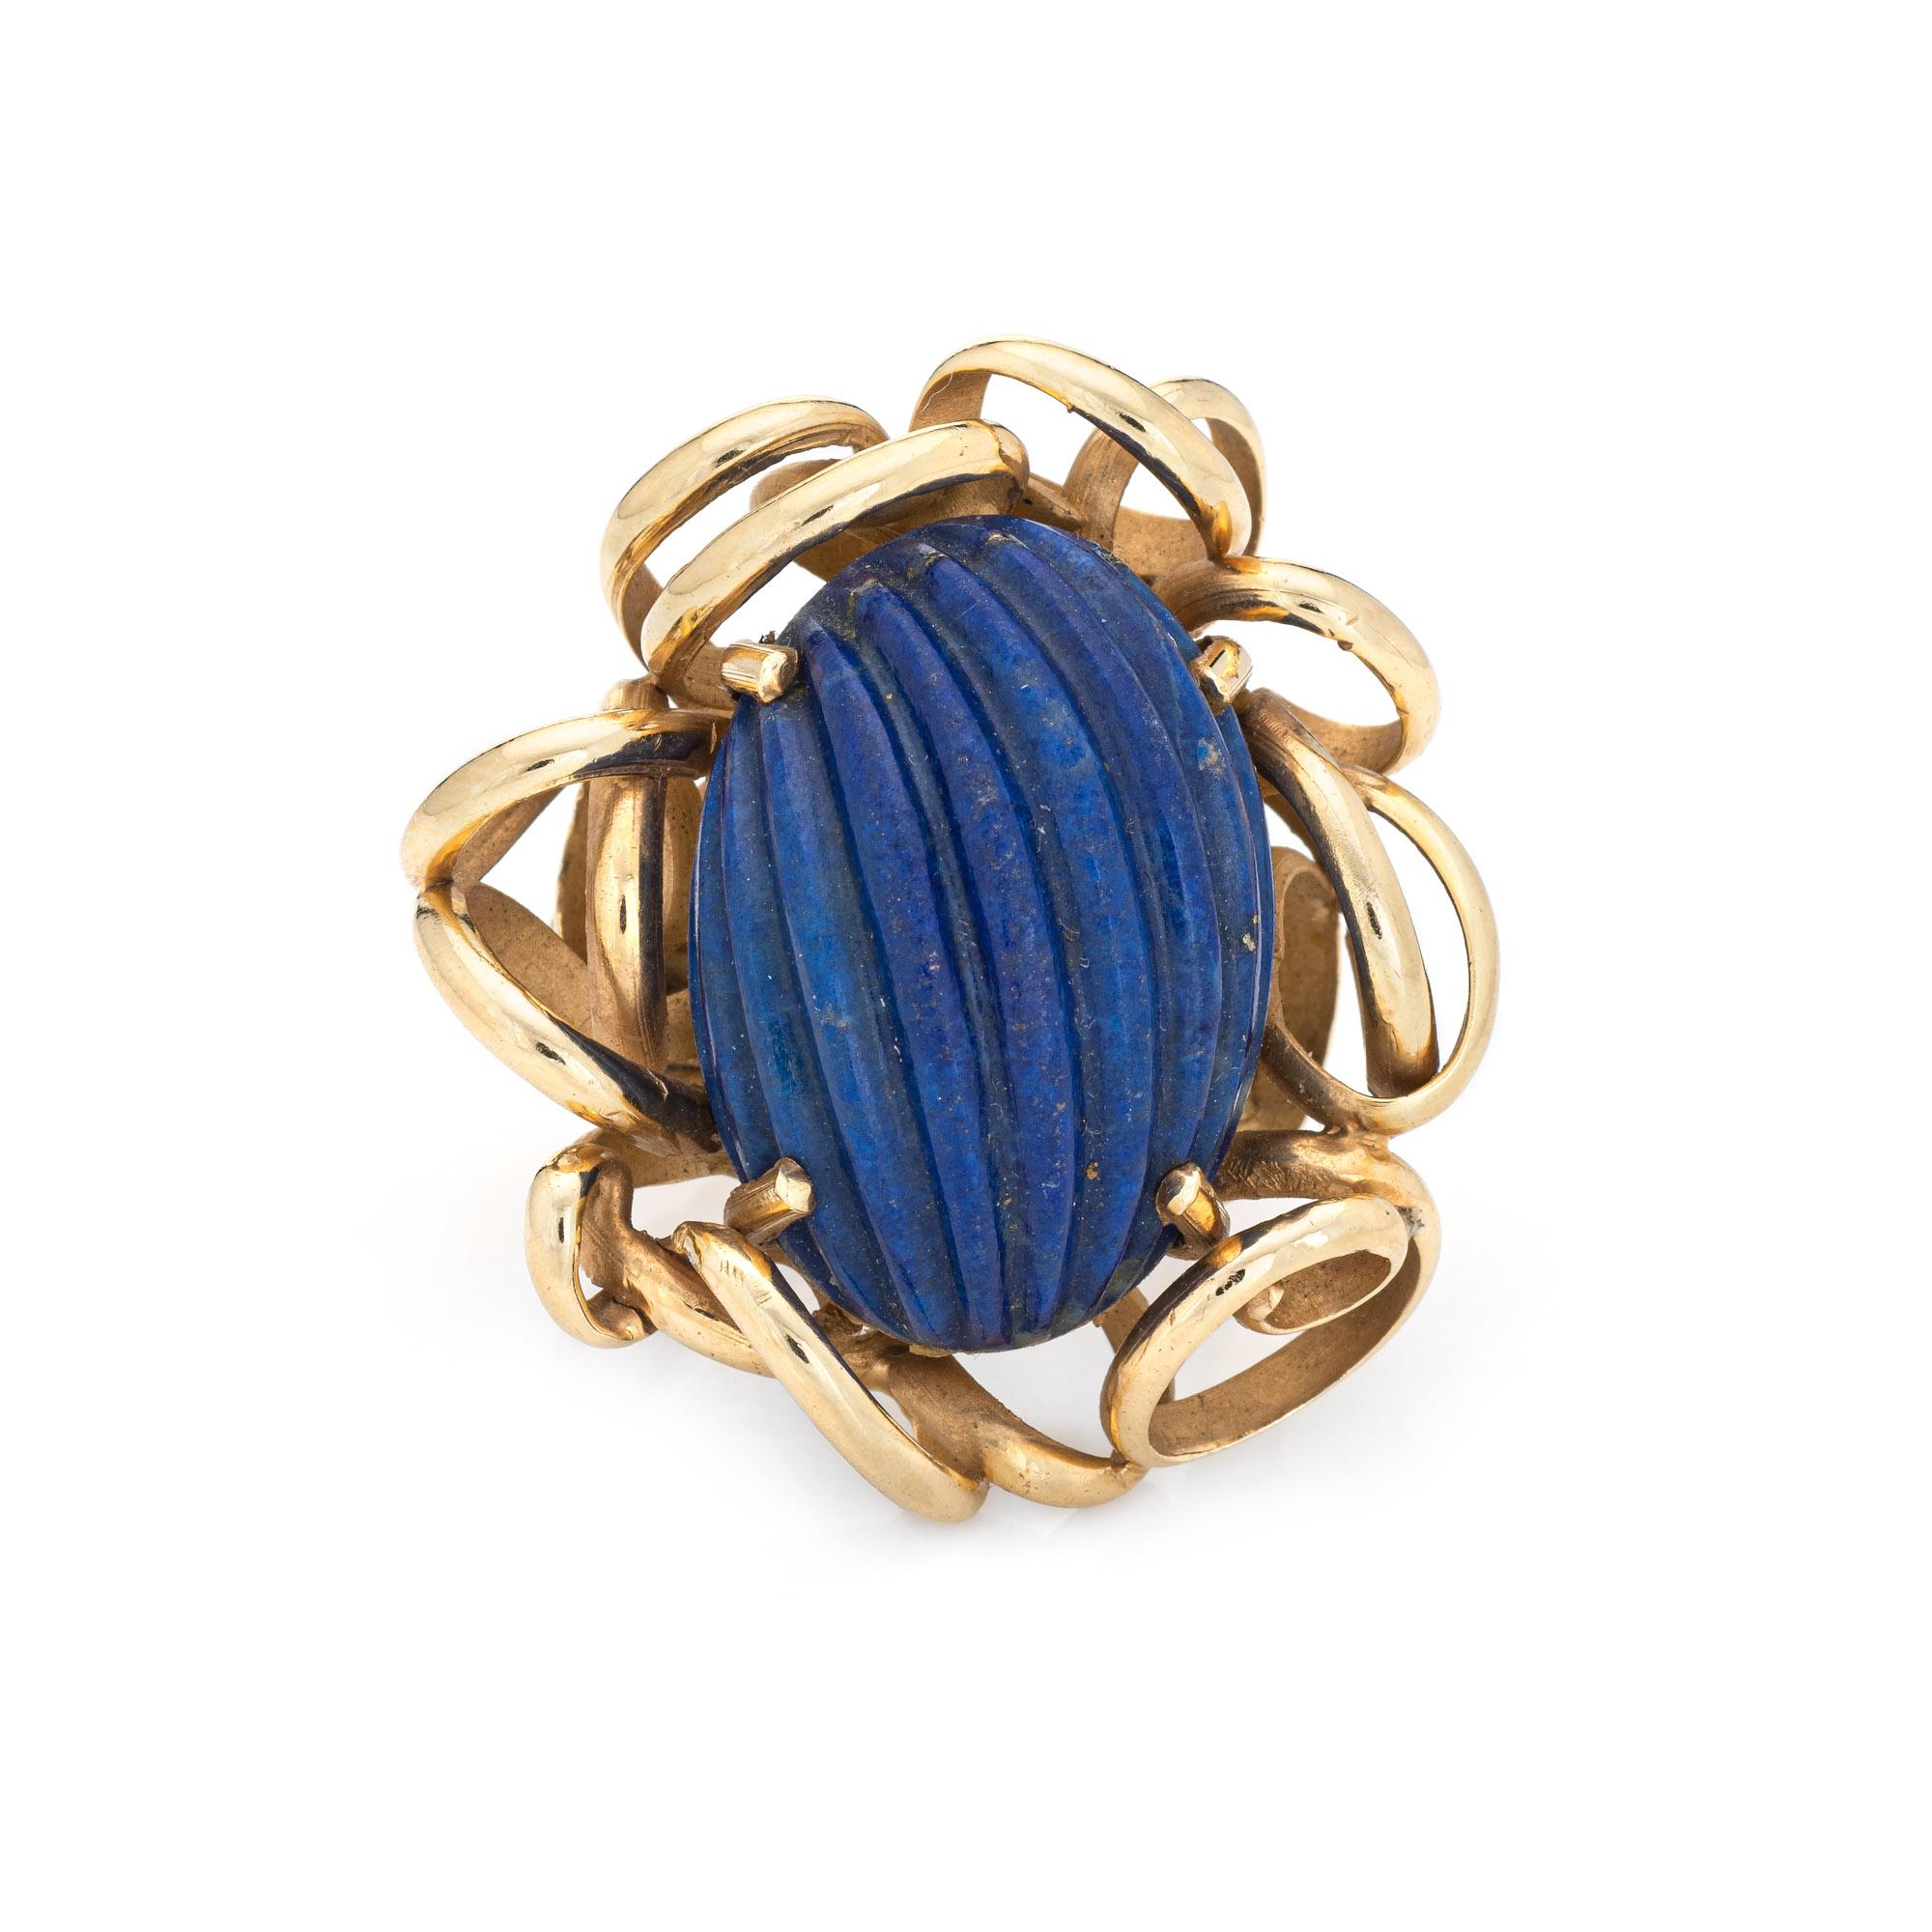 Stylish fluted lapis lazuli vintage cocktail ring (circa 1960s) crafted in 14 karat yellow gold. 

Fluted lapis measures 22mm x 16mm. The lapis is in excellent condition and free of cracks or chips. 

The fluted lapis is set into an elaborate mount